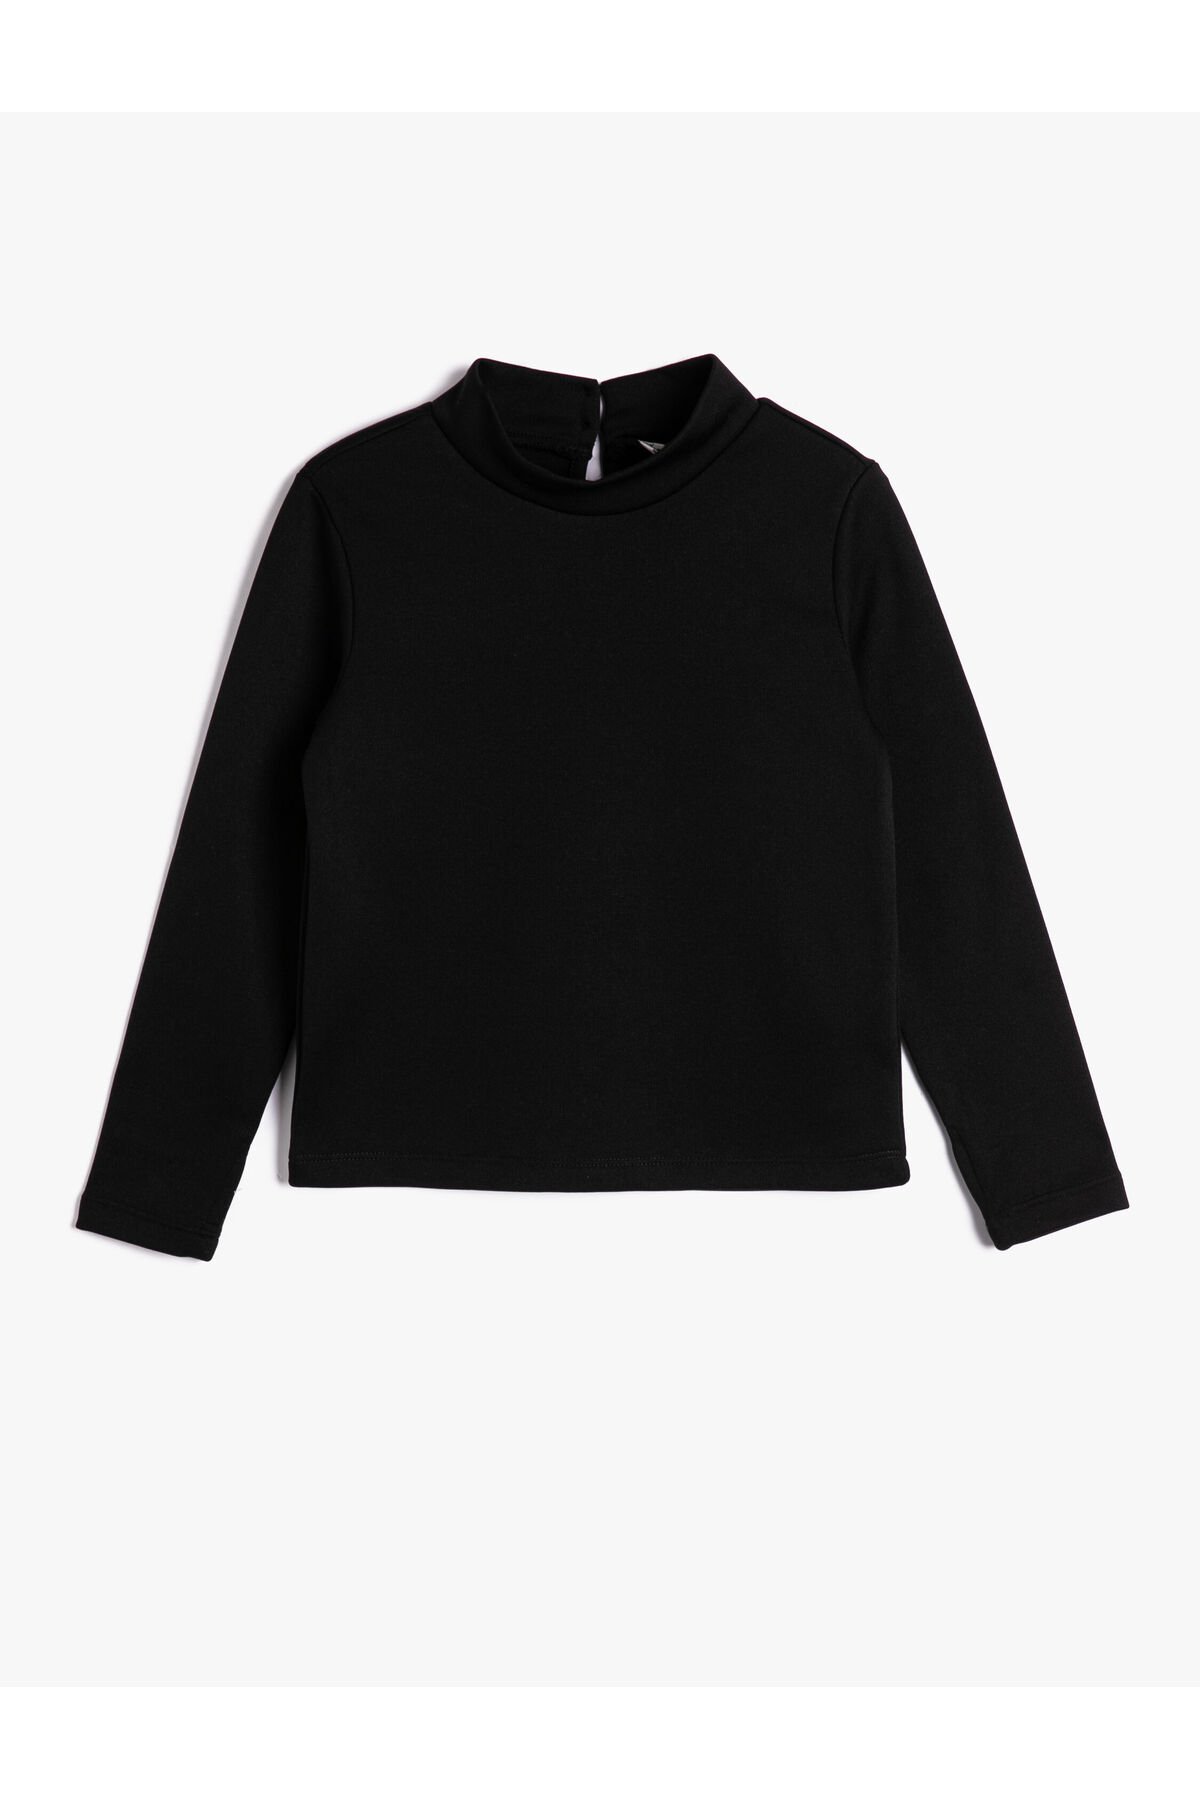 Levně Koton Basic Sweatshirt Long Sleeved Stand-Up Collar With Back Button Fastening.